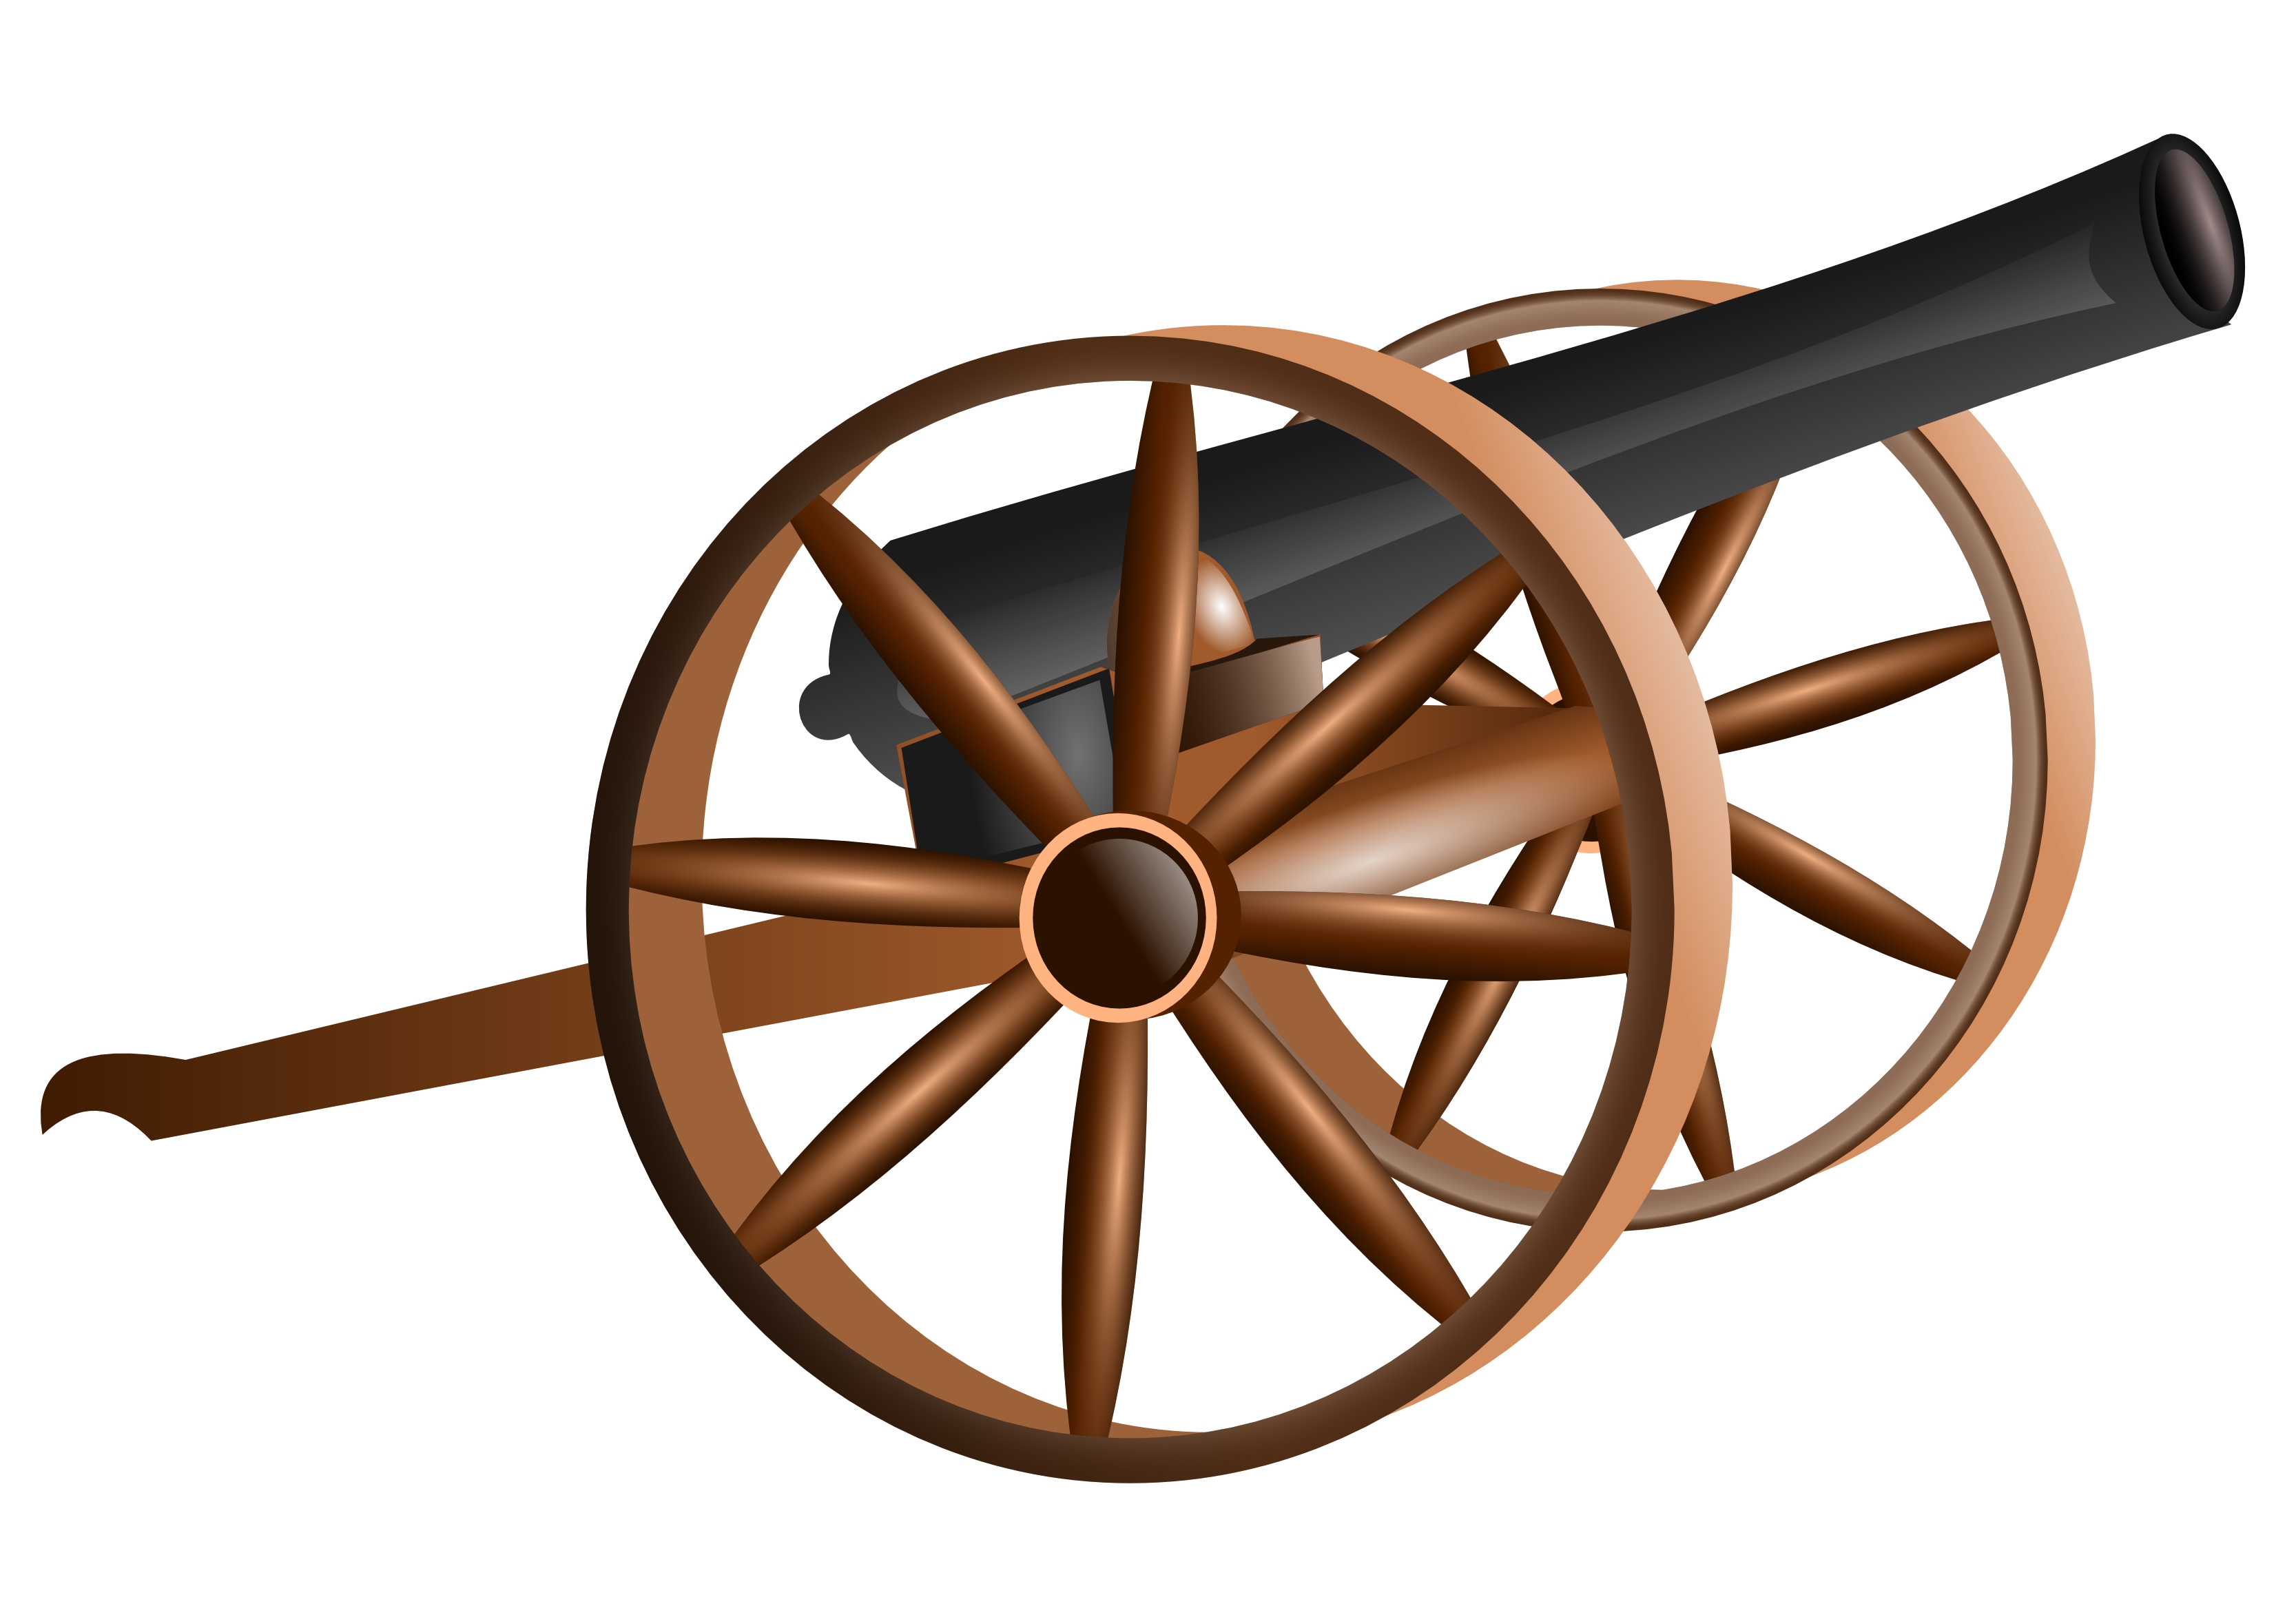 cannon clipart old firing